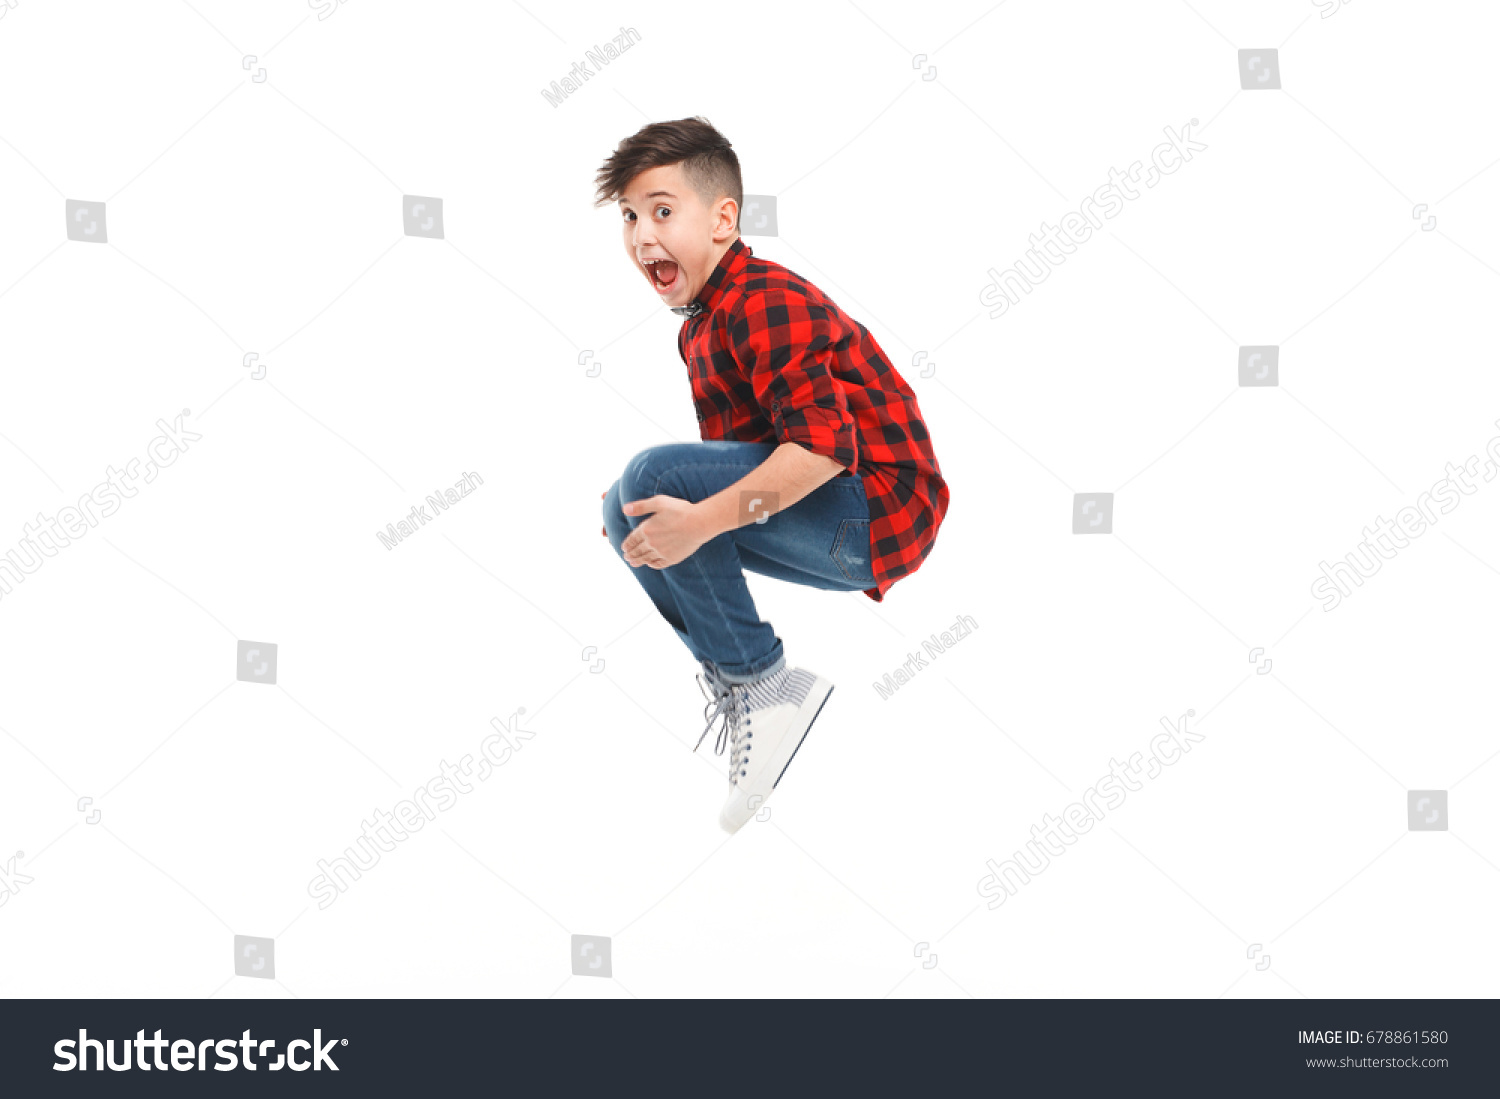 Side view of excited young boy jumping isolated on white.  #678861580